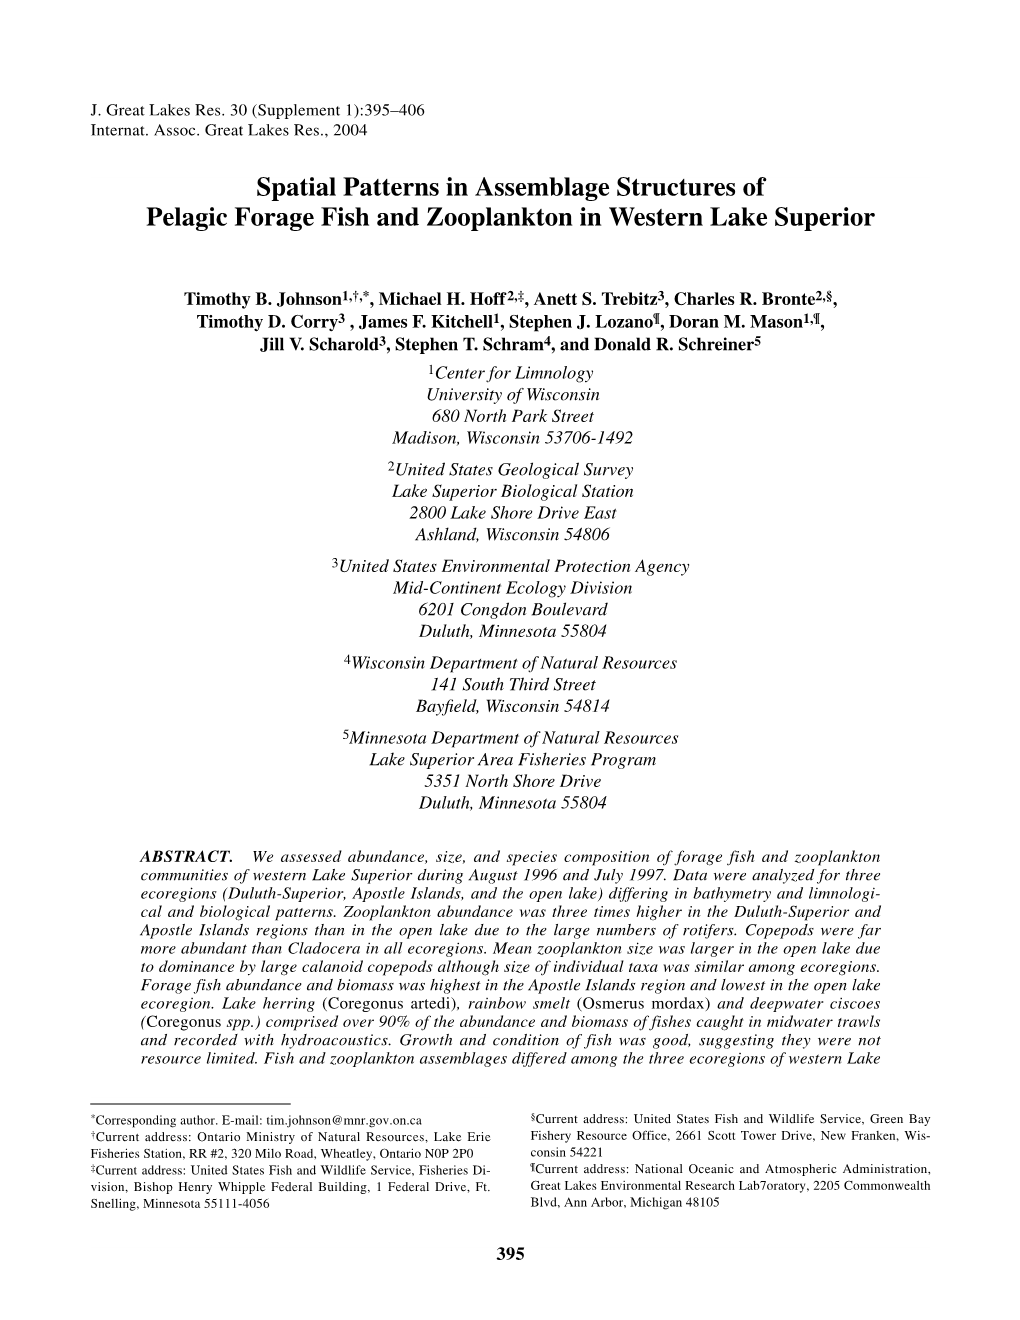 Spatial Patterns in Assemblage Structures of Pelagic Forage Fish and Zooplankton in Western Lake Superior